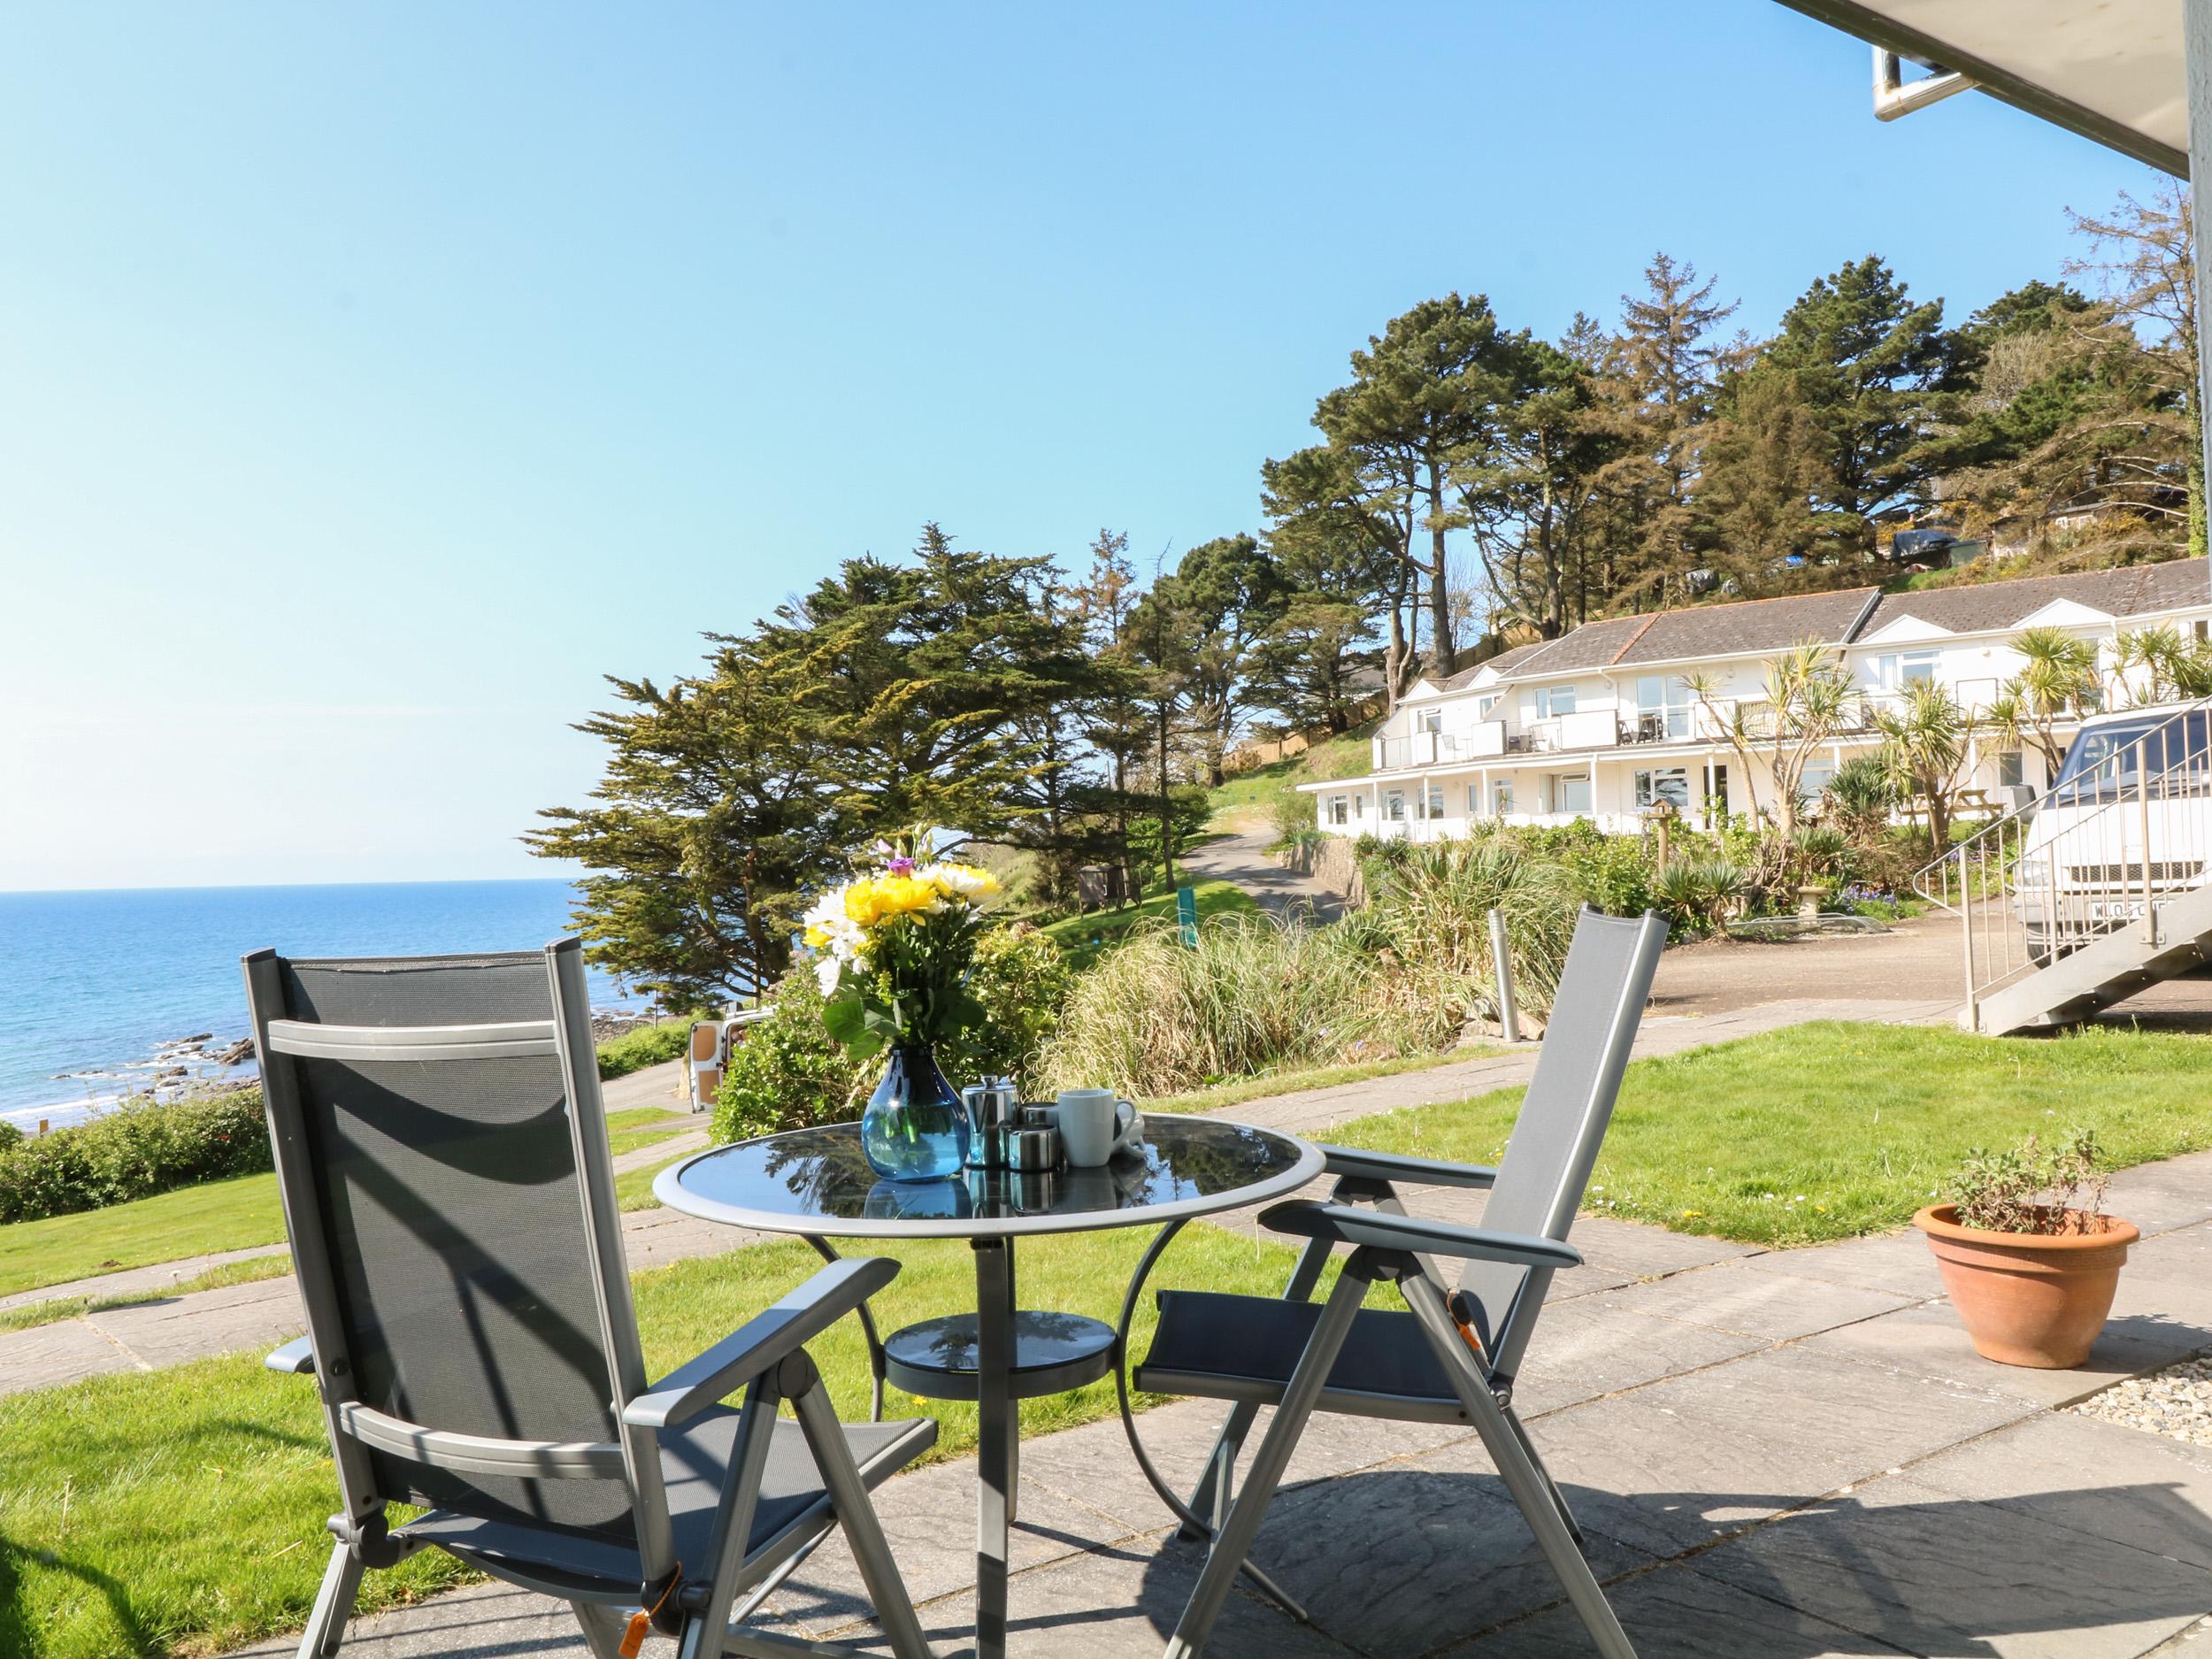 Holiday Cottage Reviews for Apartment 21 - Cottage Holiday in Looe, Cornwall Inc Scilly